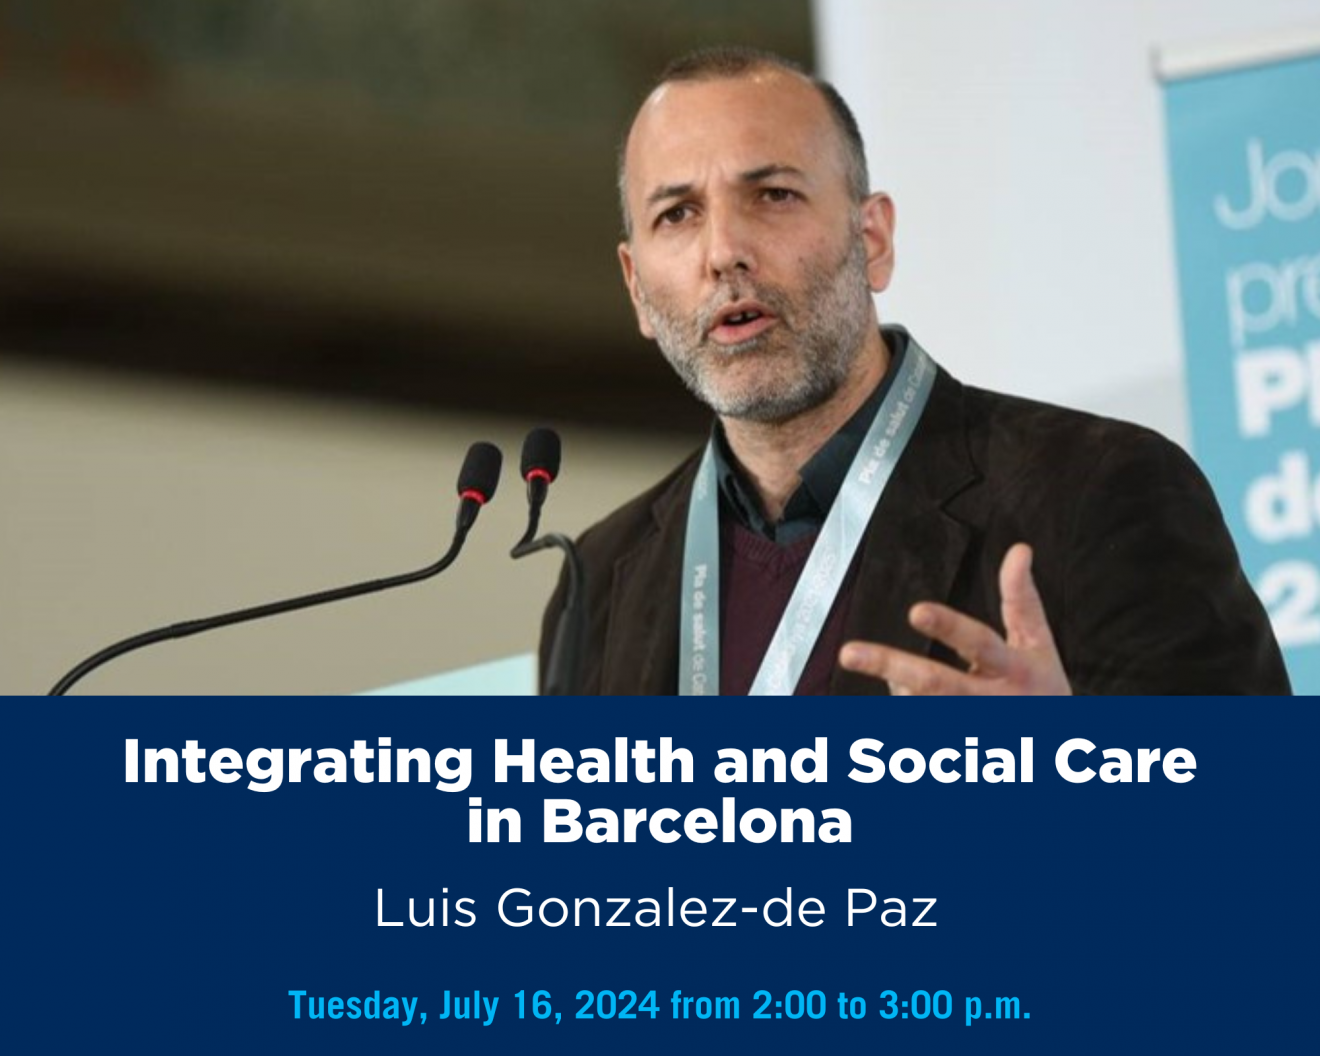 A person speaking at a podium with text that says 'Integrating Health and Social Care in Barcelona Luis Gonzalez-de Paz, Tuesday, July 16, 2024 from 2:00 to 3:00 p.m.'